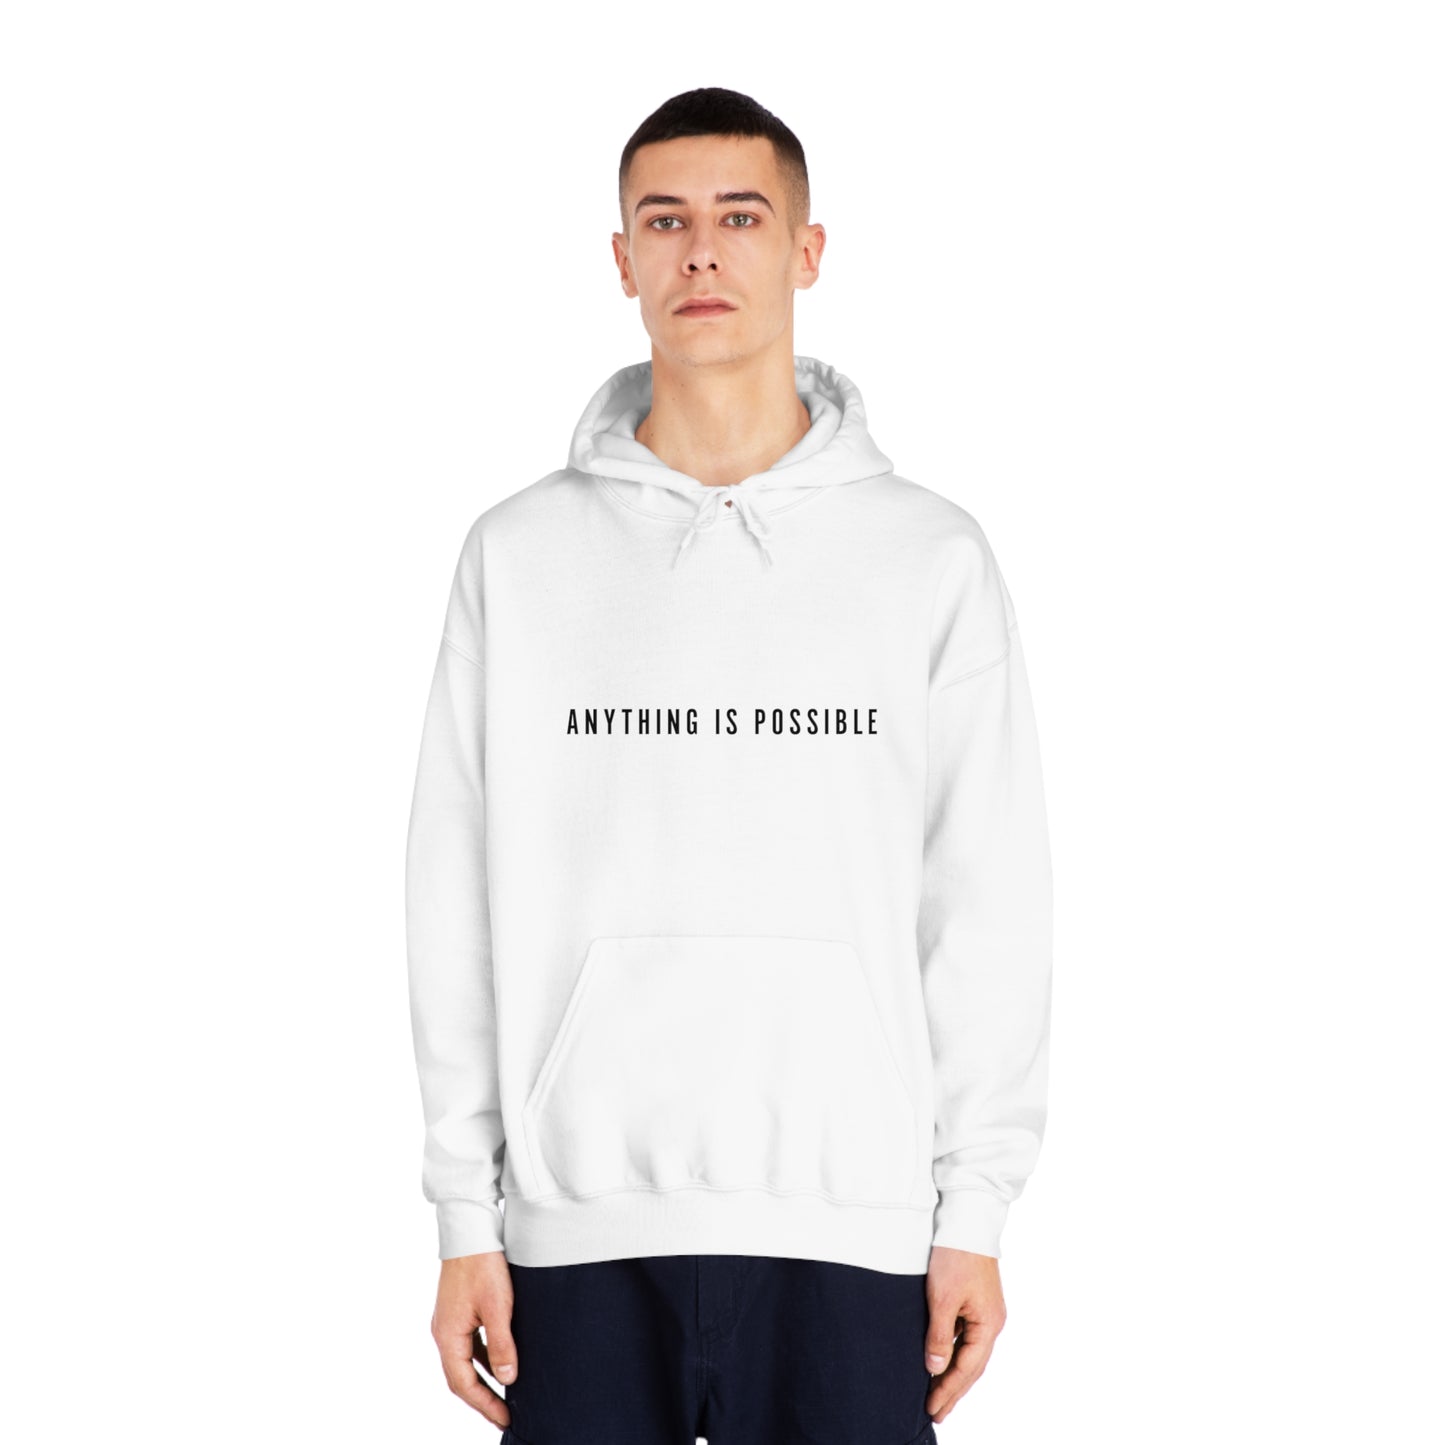 YES, Anything is Possible Graphic Hoodie